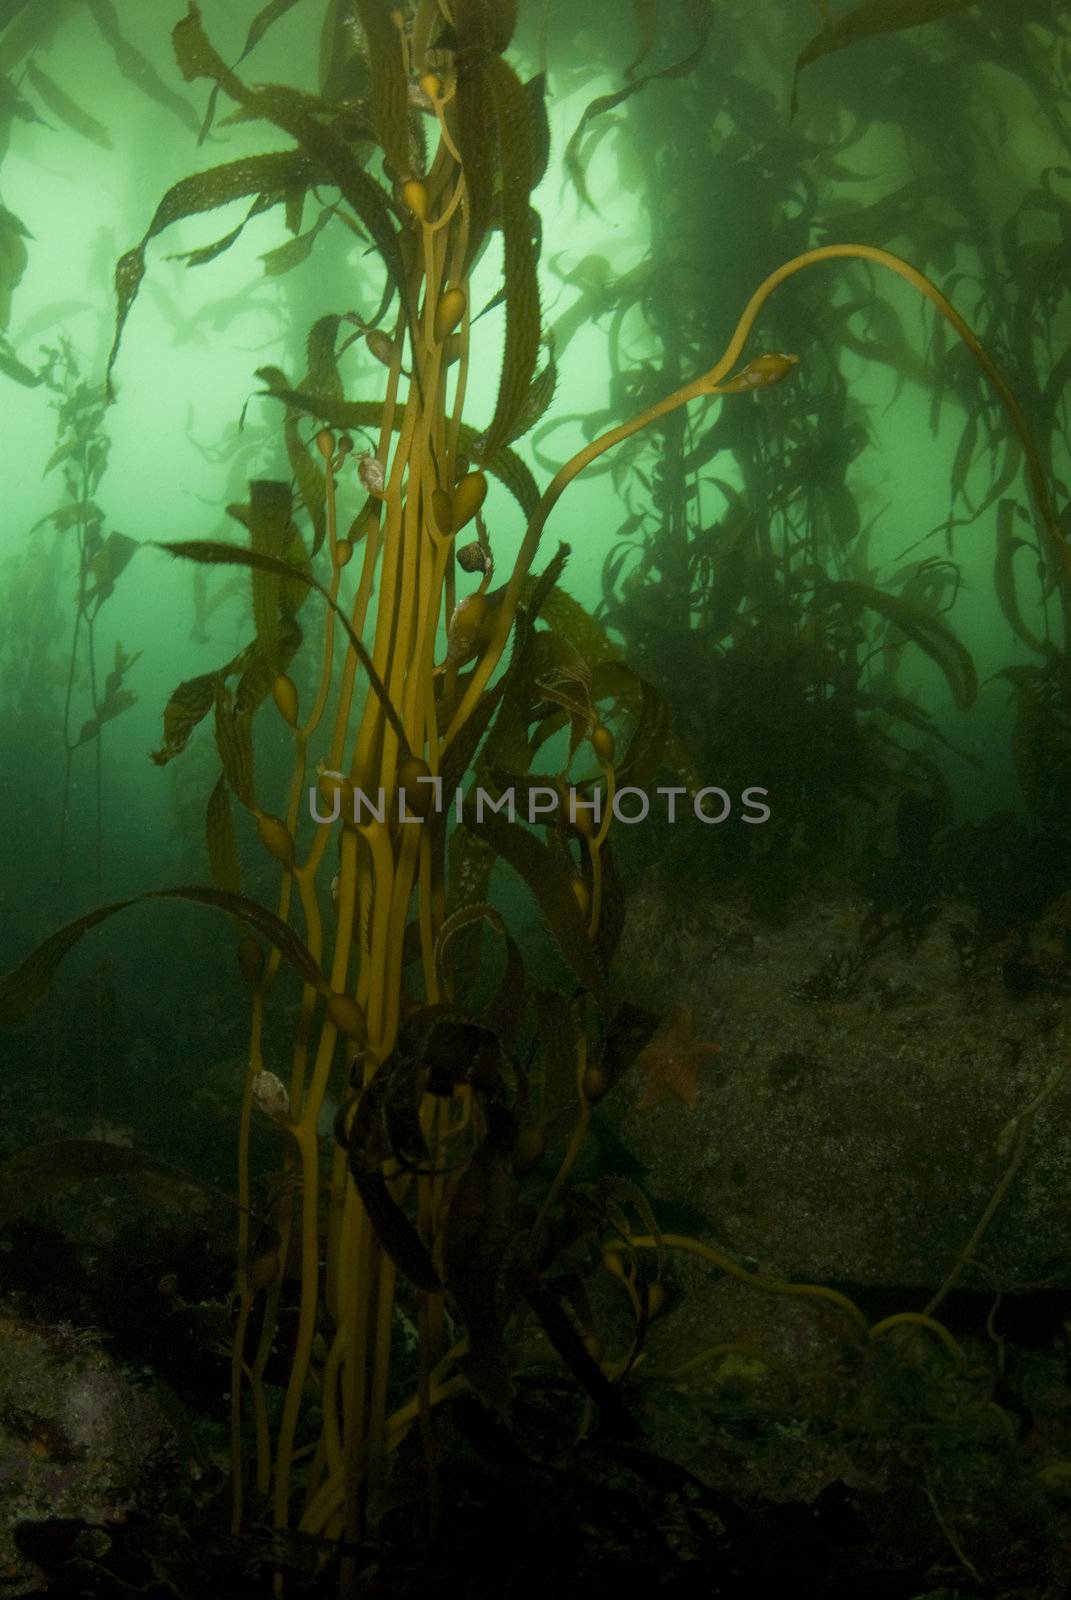 Kelp Forest Portrait by Naluphoto